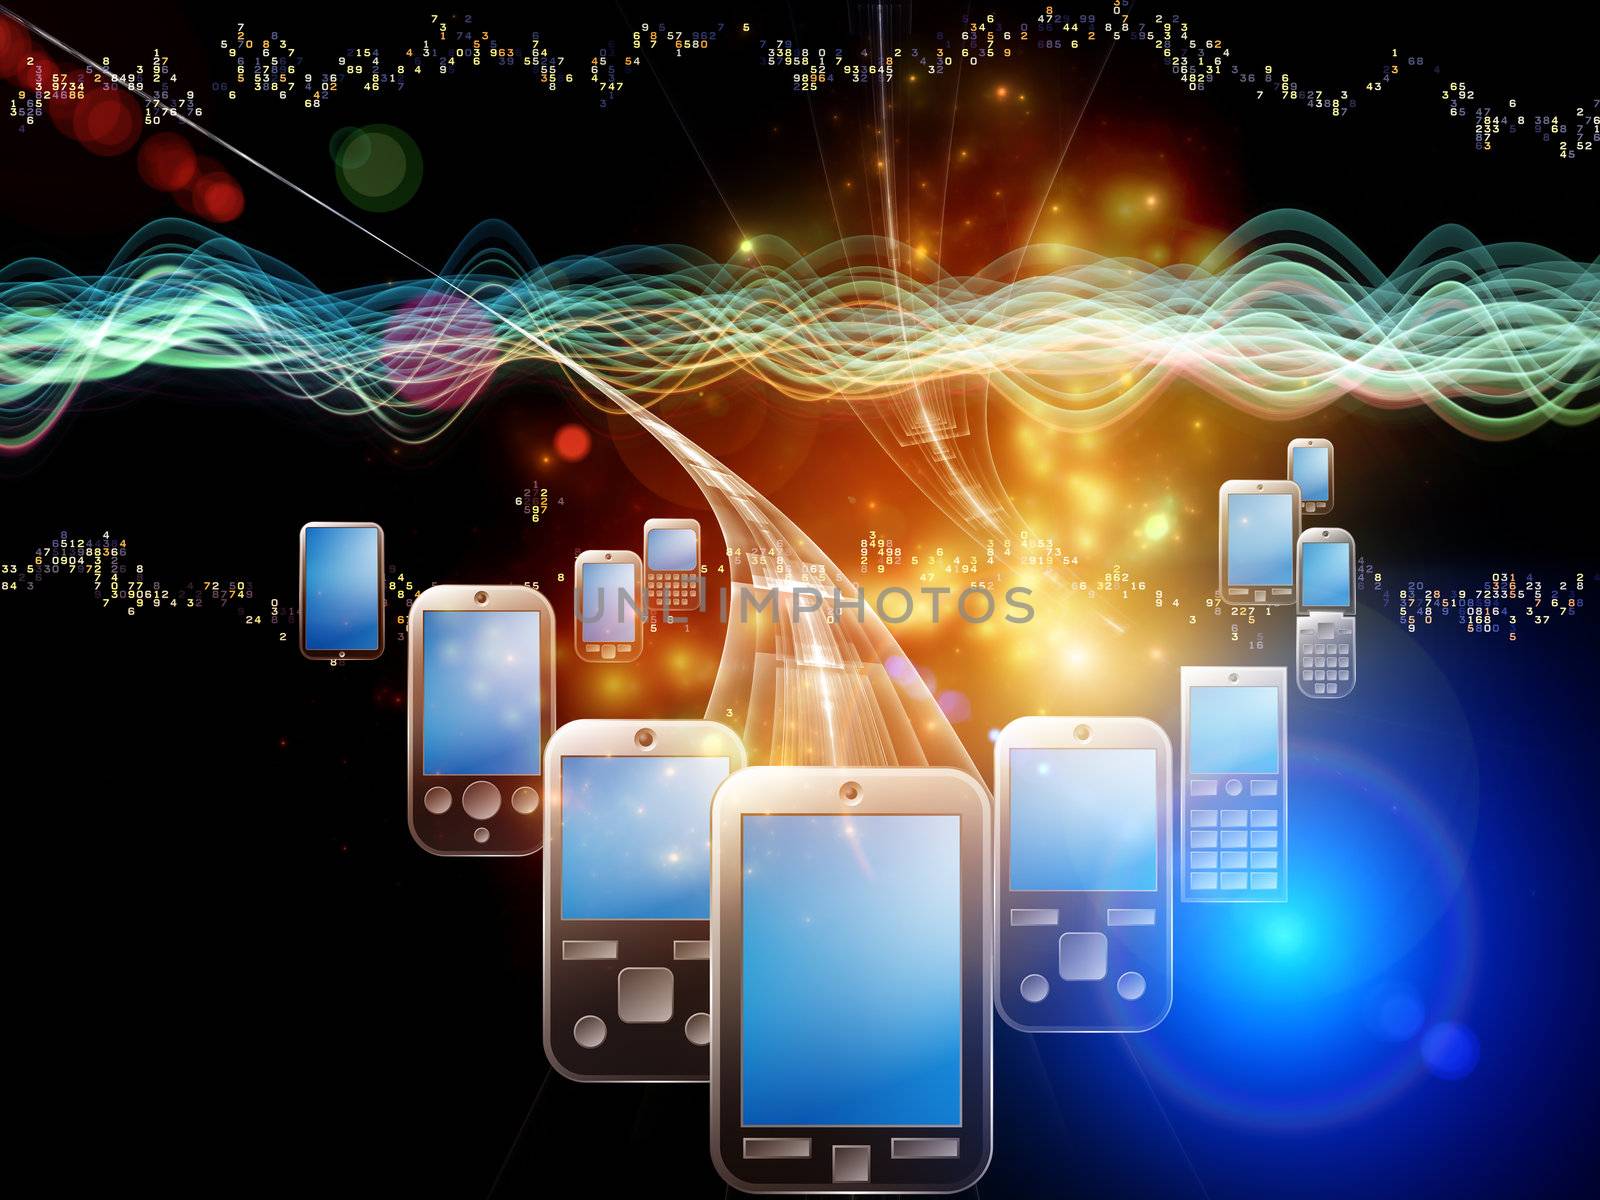 Rendering of cellular phones, numbers and abstract design elements on the subject of digital phone technology, cellular communication and modern electronic gadgets